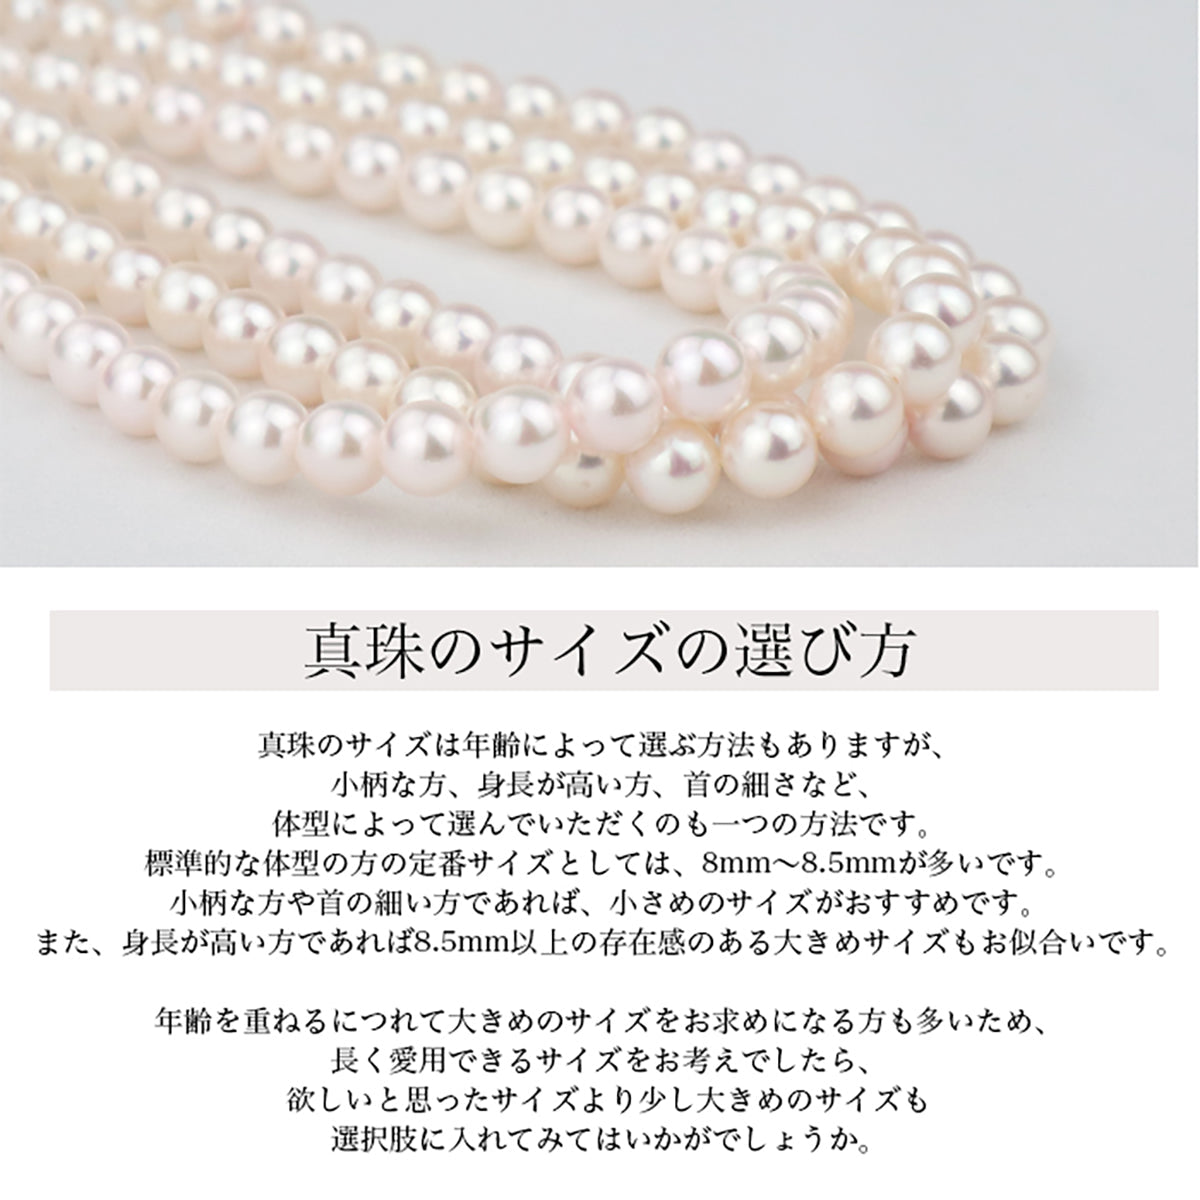 [Hanadama certified pearls] Formal necklace 2-piece set [8.5-9.0mm] (Earrings included) Akoya pearls with storage case [New Japan Pearl Research Institute certificate]